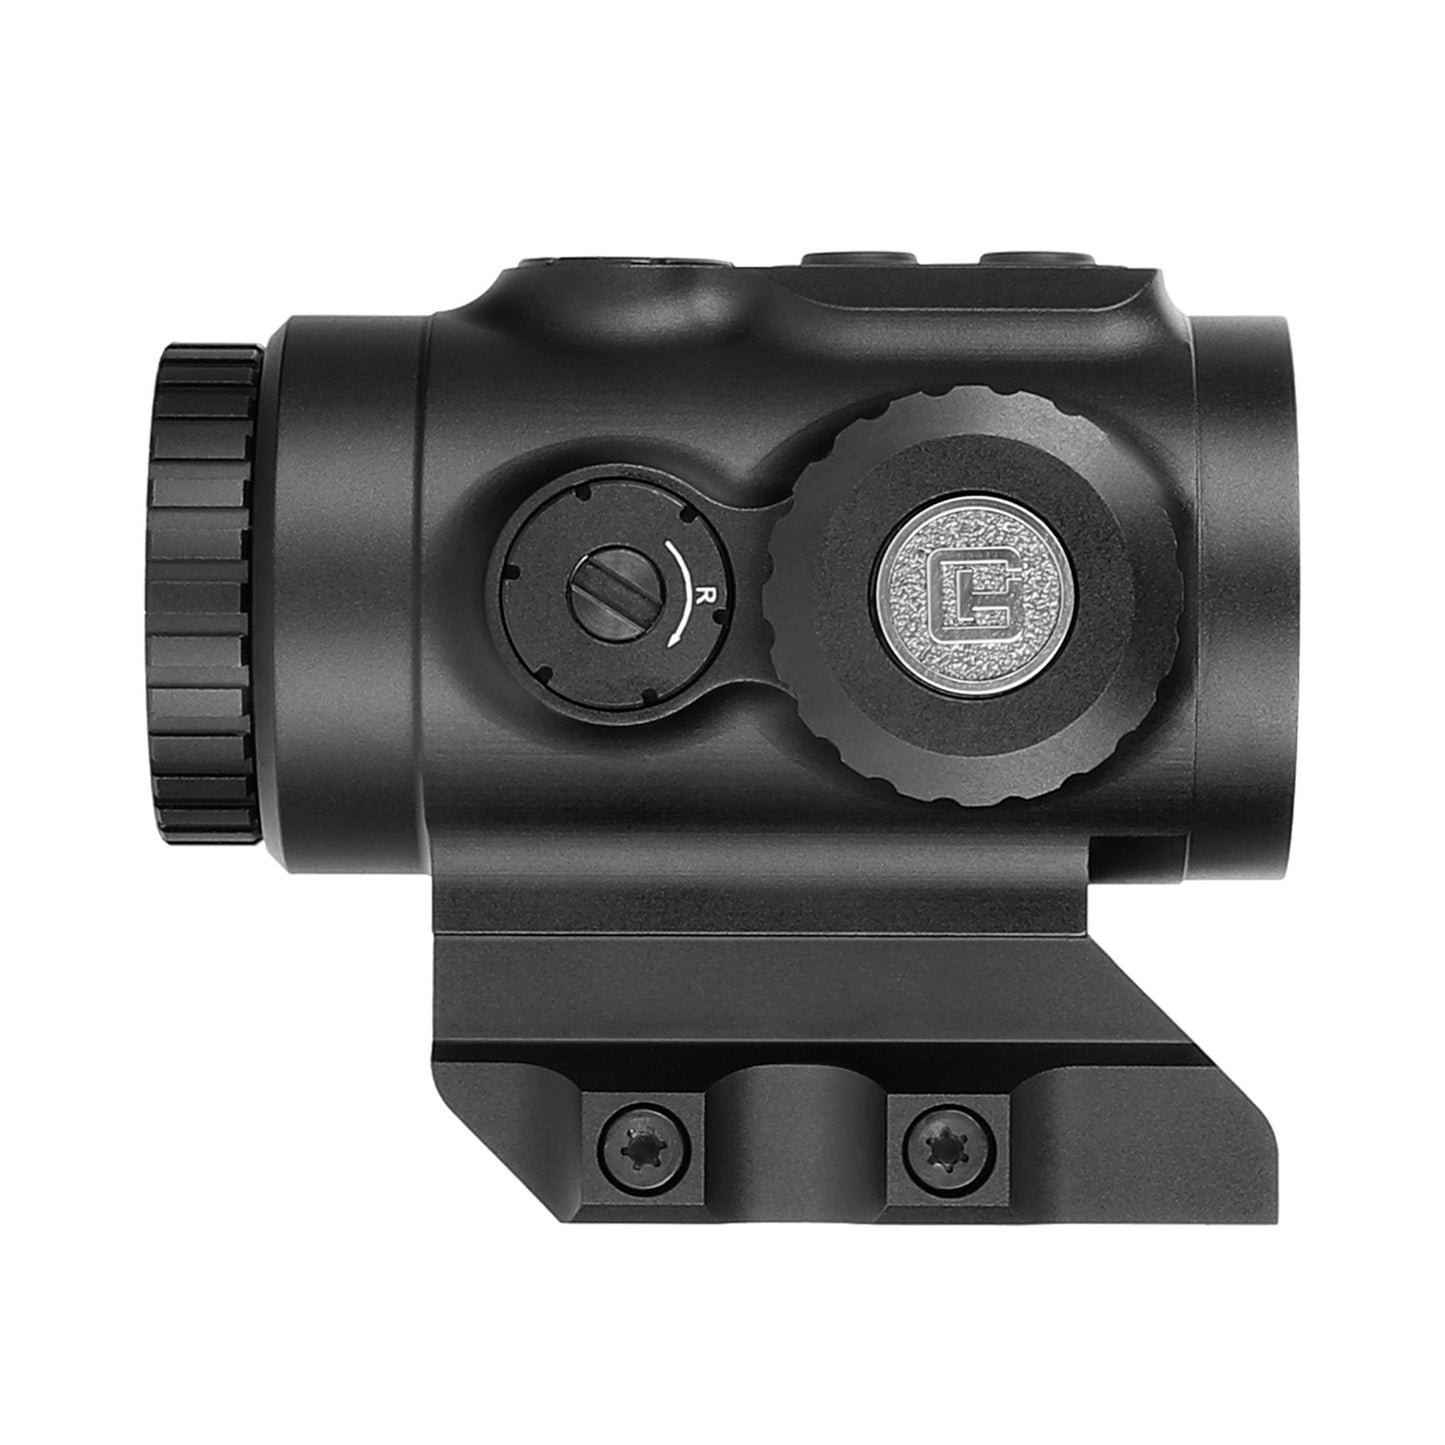 ohhunt® 3X Prism Scope Red Illuminated with Absolute Co-Witness Mount